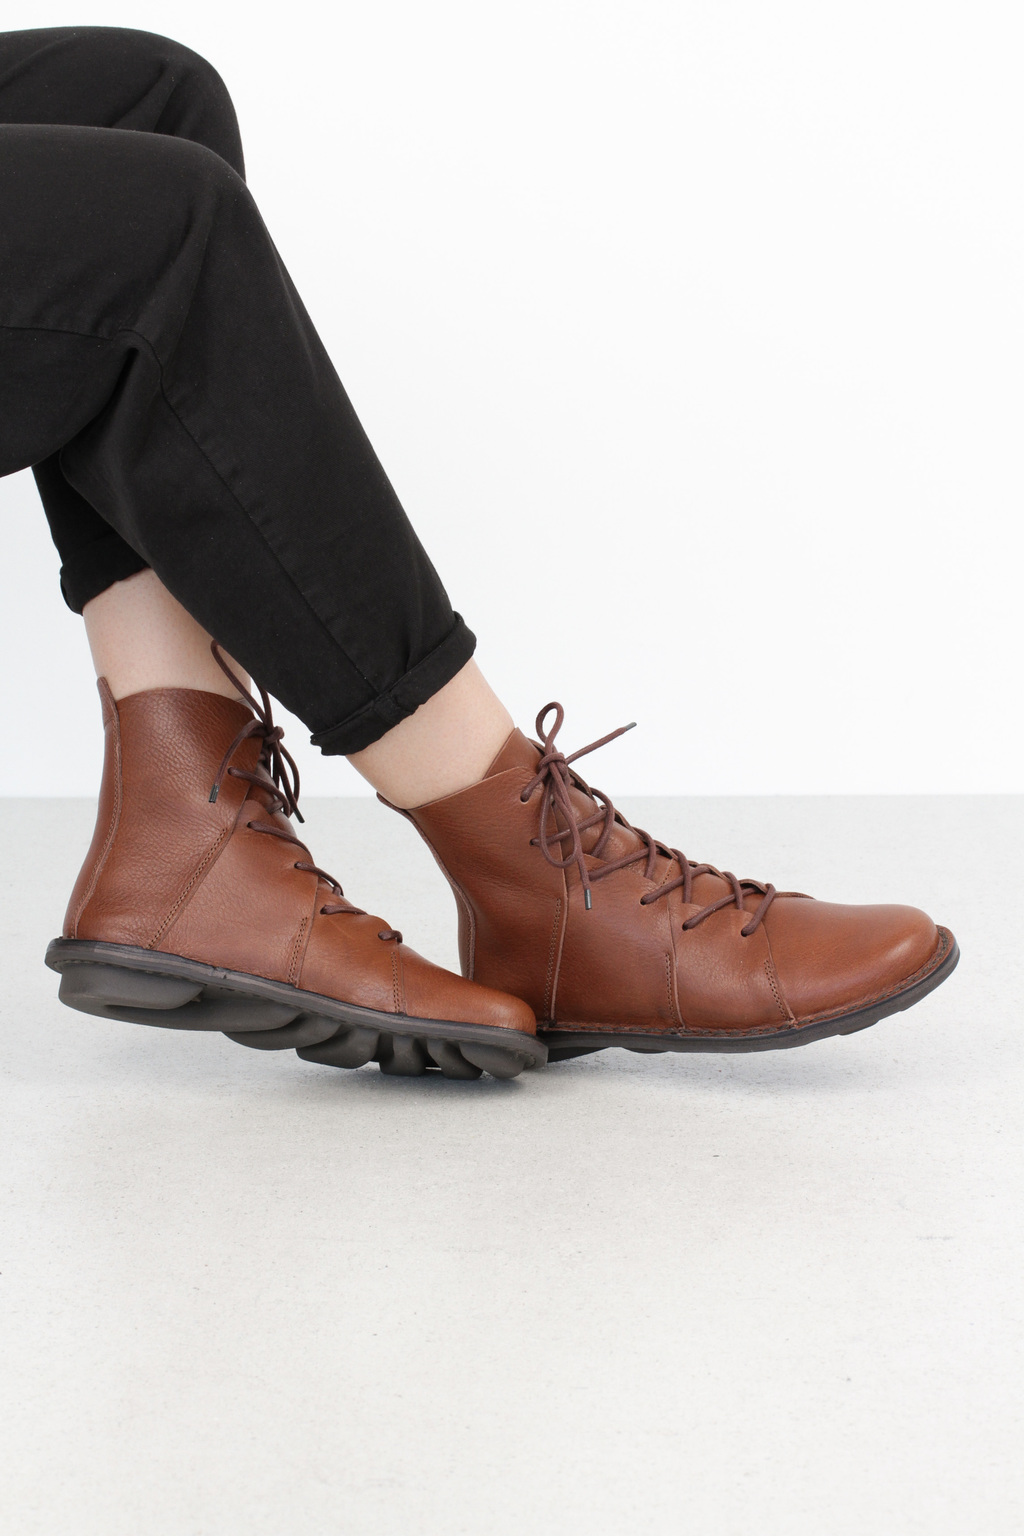 Nomad f - Trippen shoes - exceptional design and quality from Germany